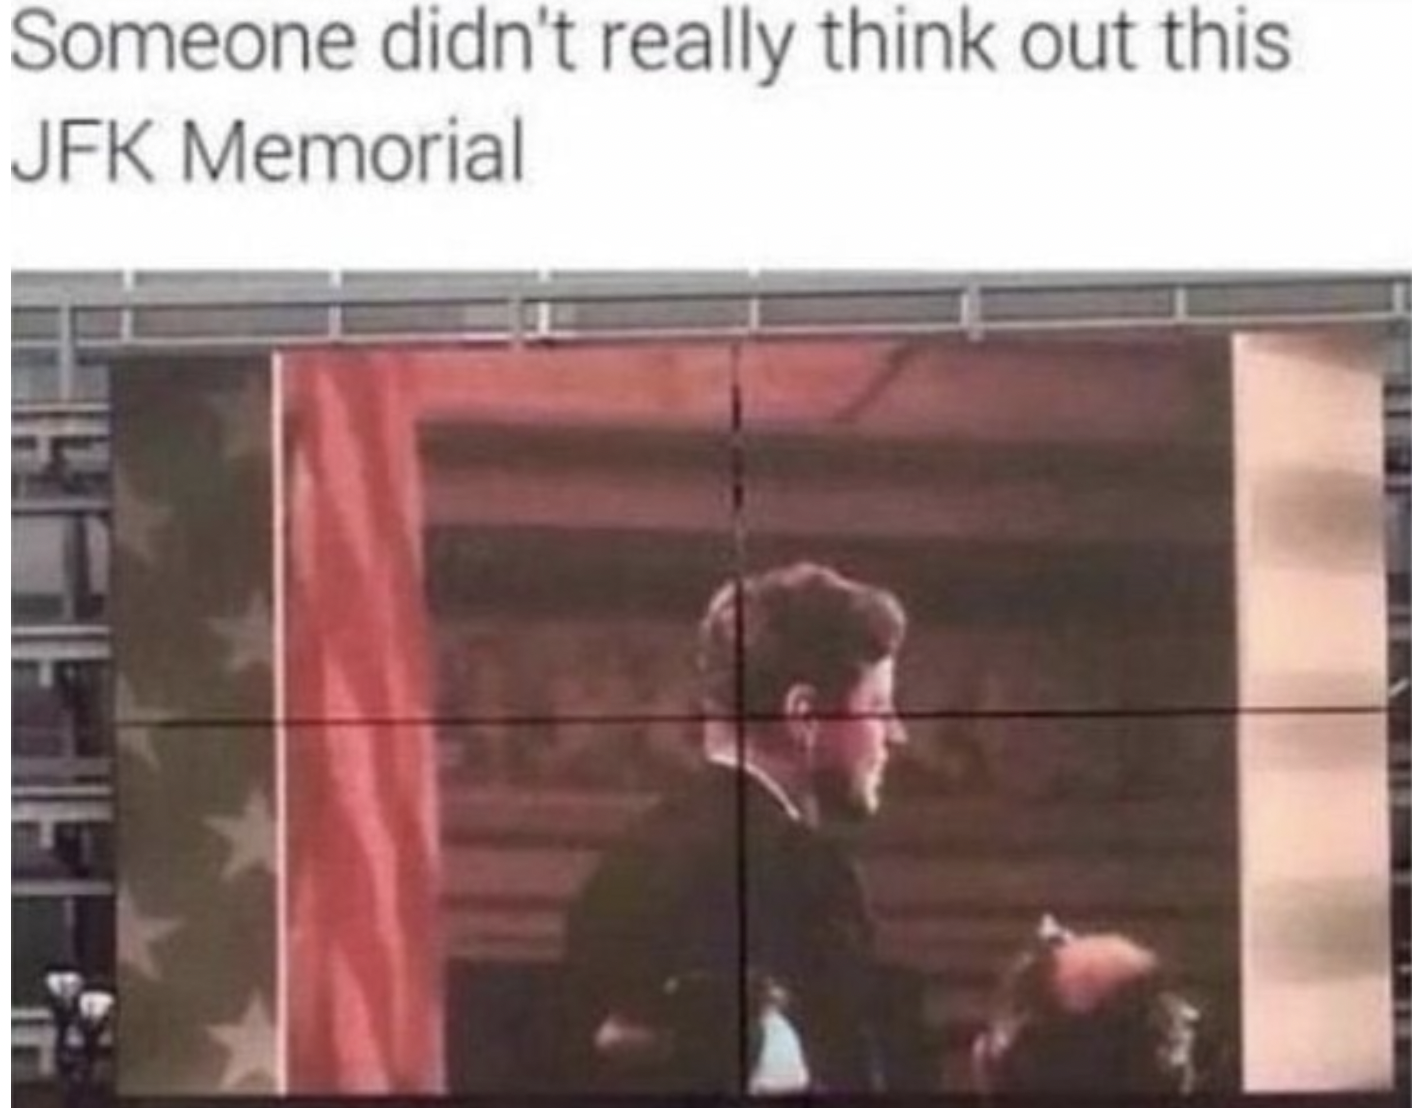 Friday Facepalms and Fails - bright eyes lyrics - Someone didn't really think out this Jfk Memorial